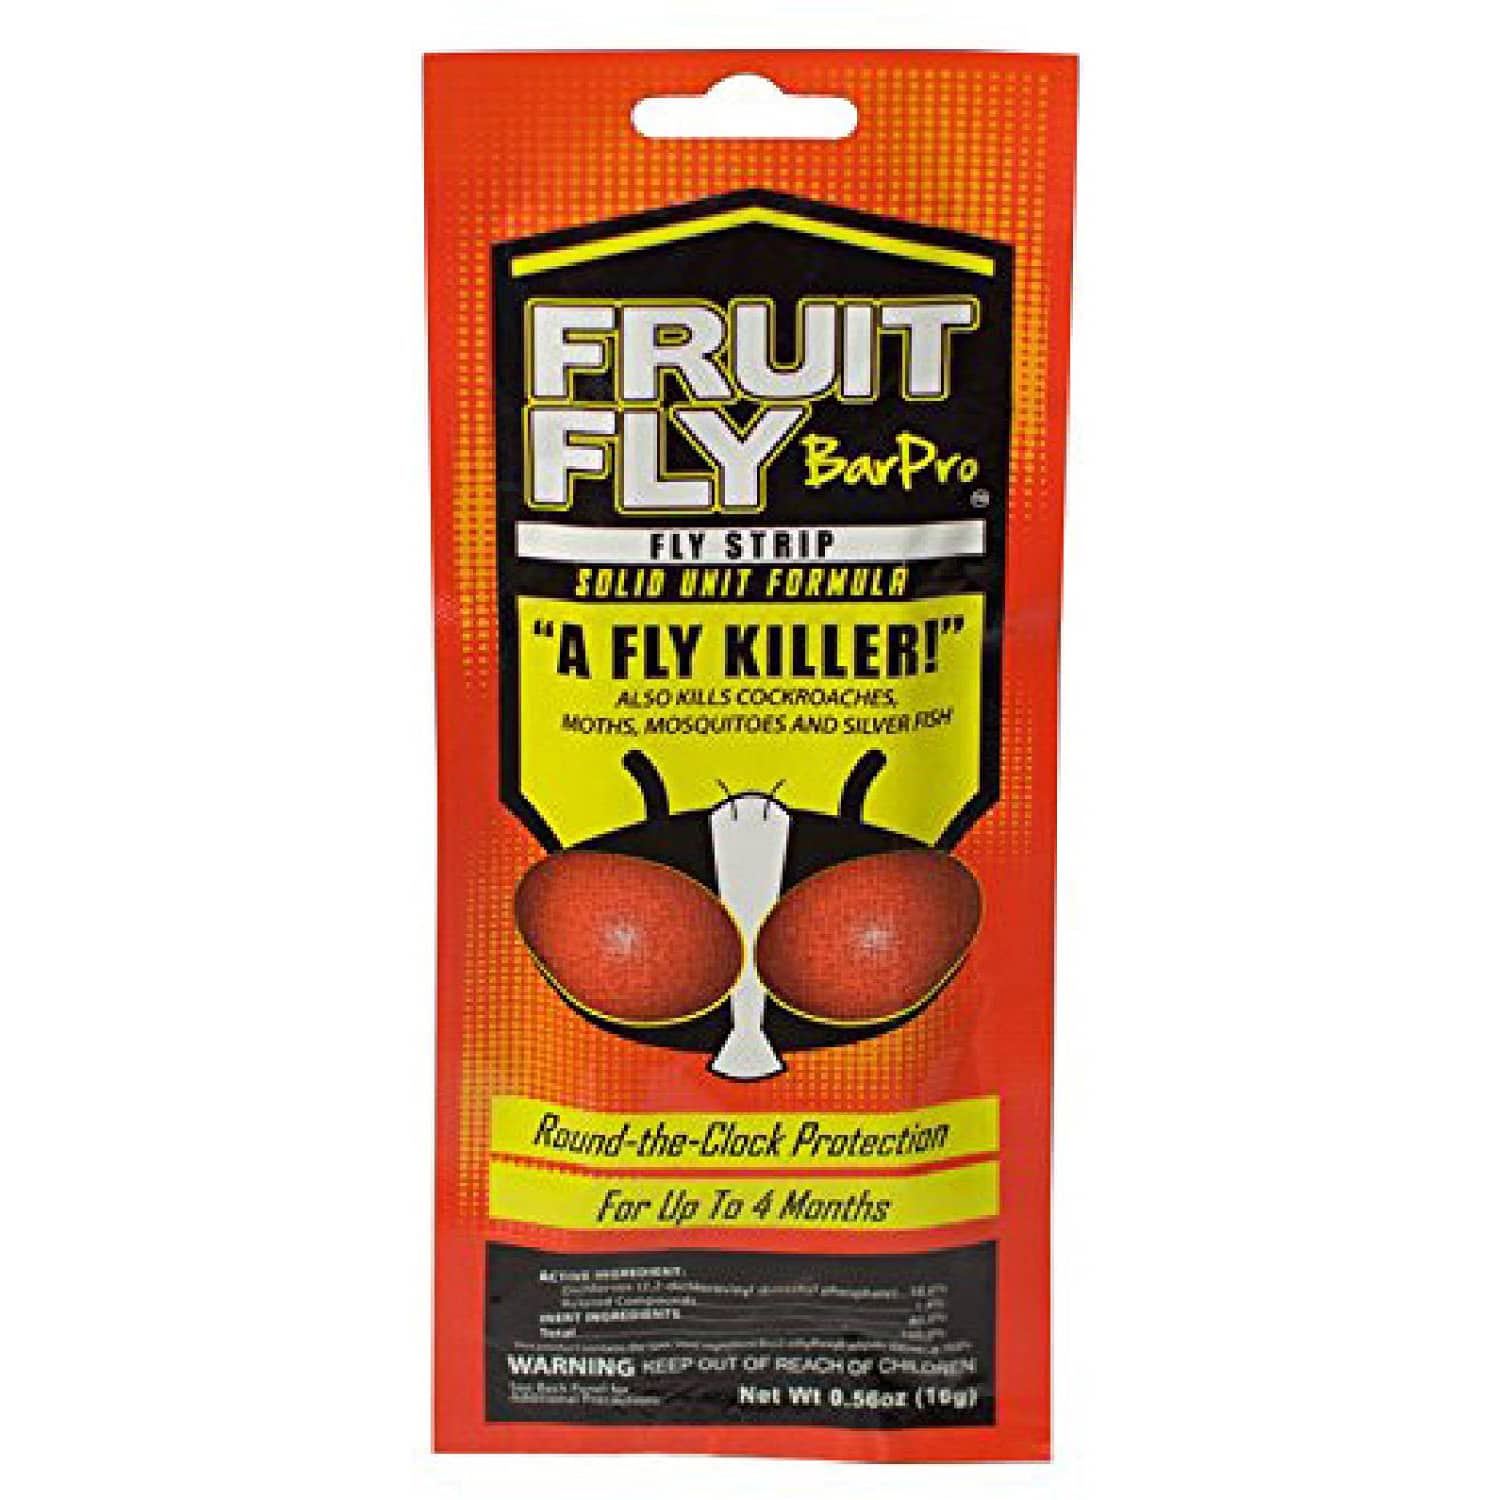 Where Fruit Flies go to Die - Coley Cooks